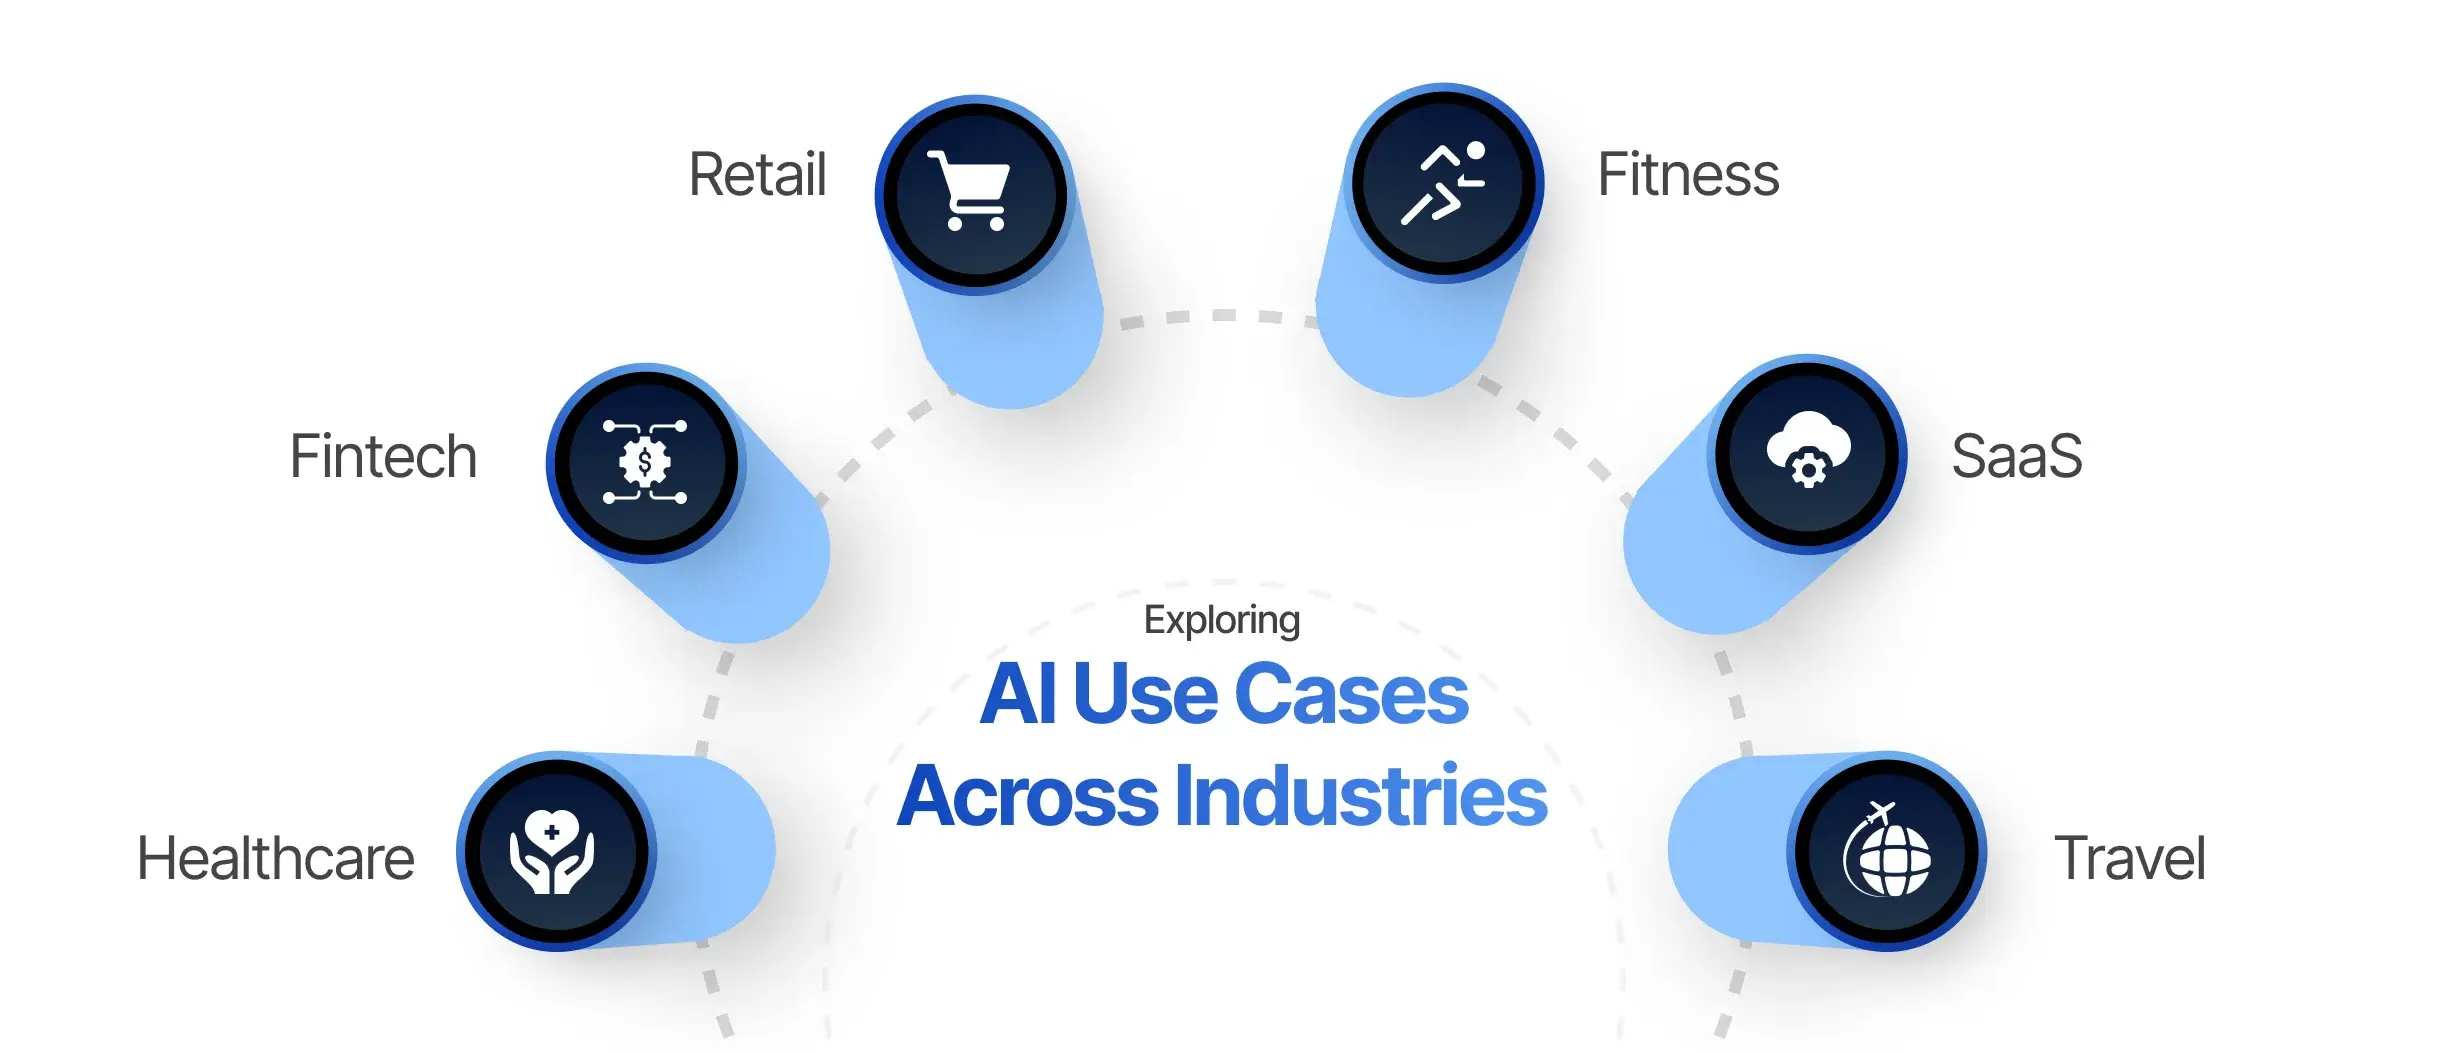 Exploring AI Use Cases Across Industries